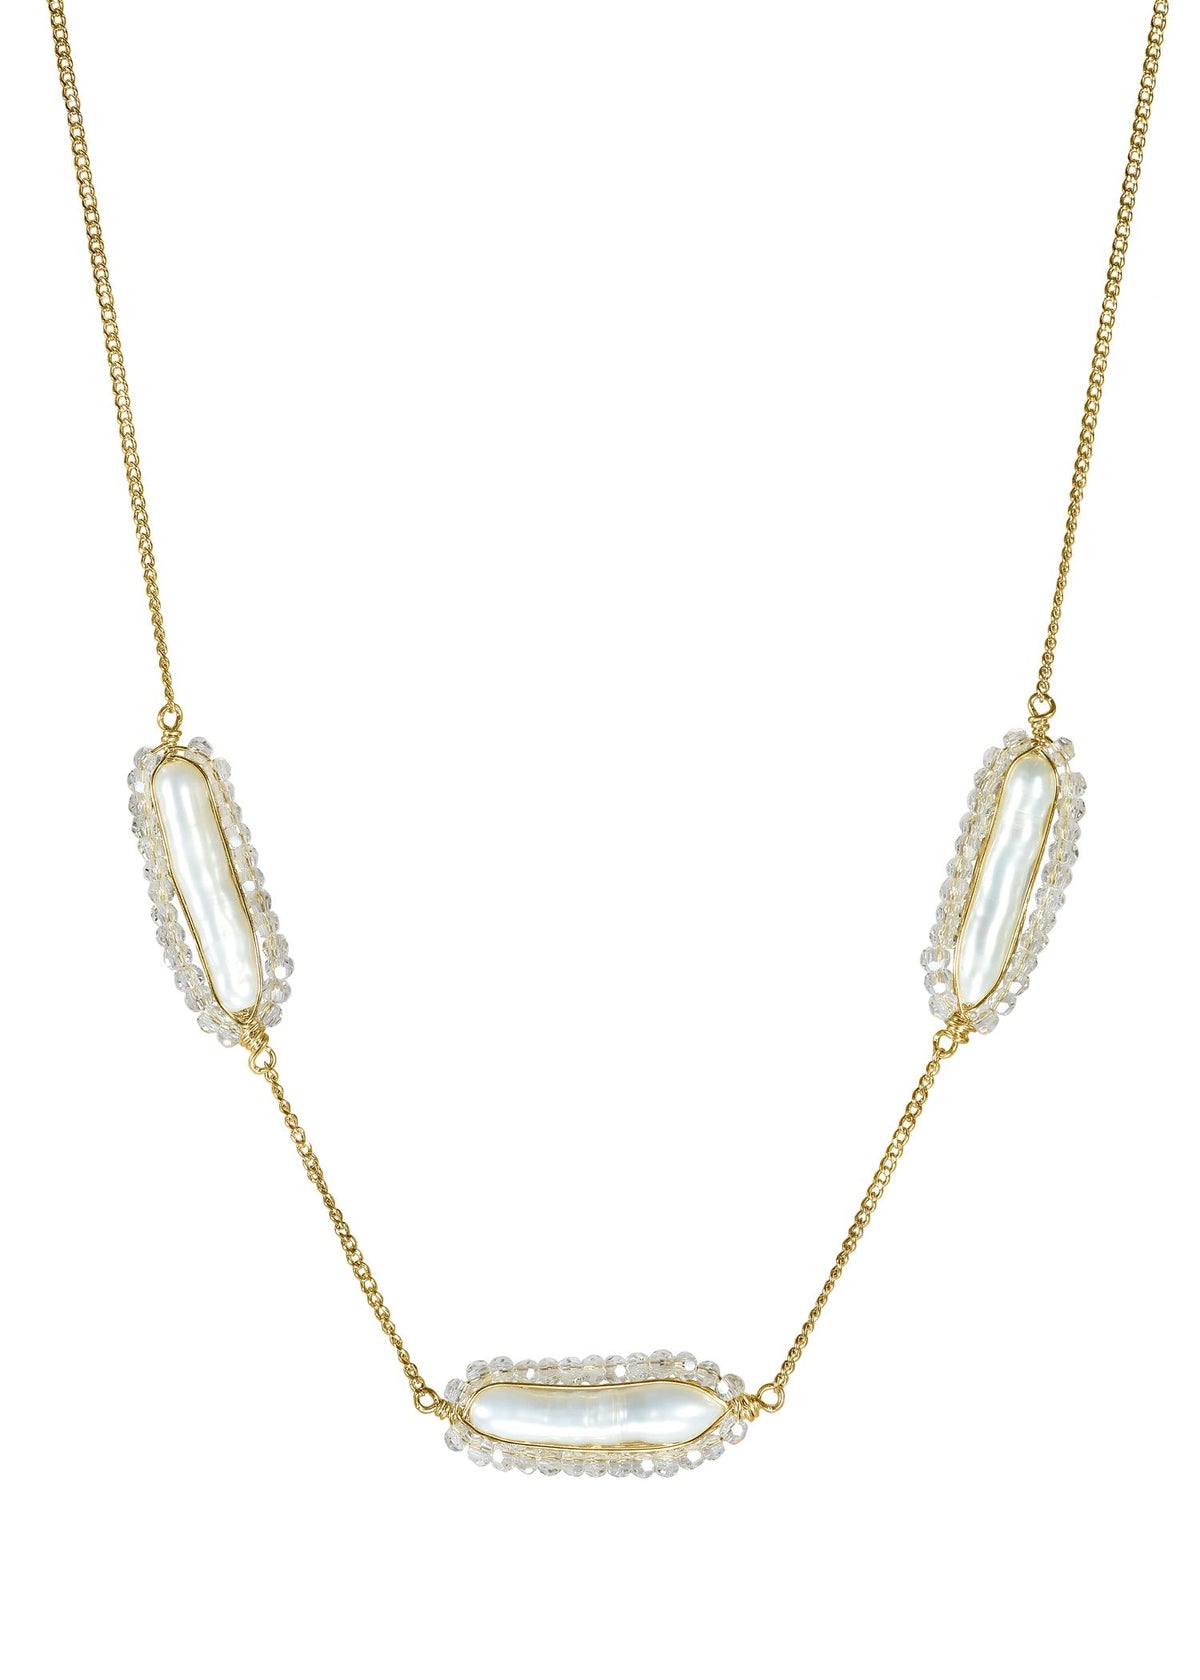 Fresh water pearl Crystal 14k gold fill Necklace measures 16” in length Pendant measures 3/4&quot; in length and 5/16&quot; in width (x3) Handmade in our Los Angeles studio